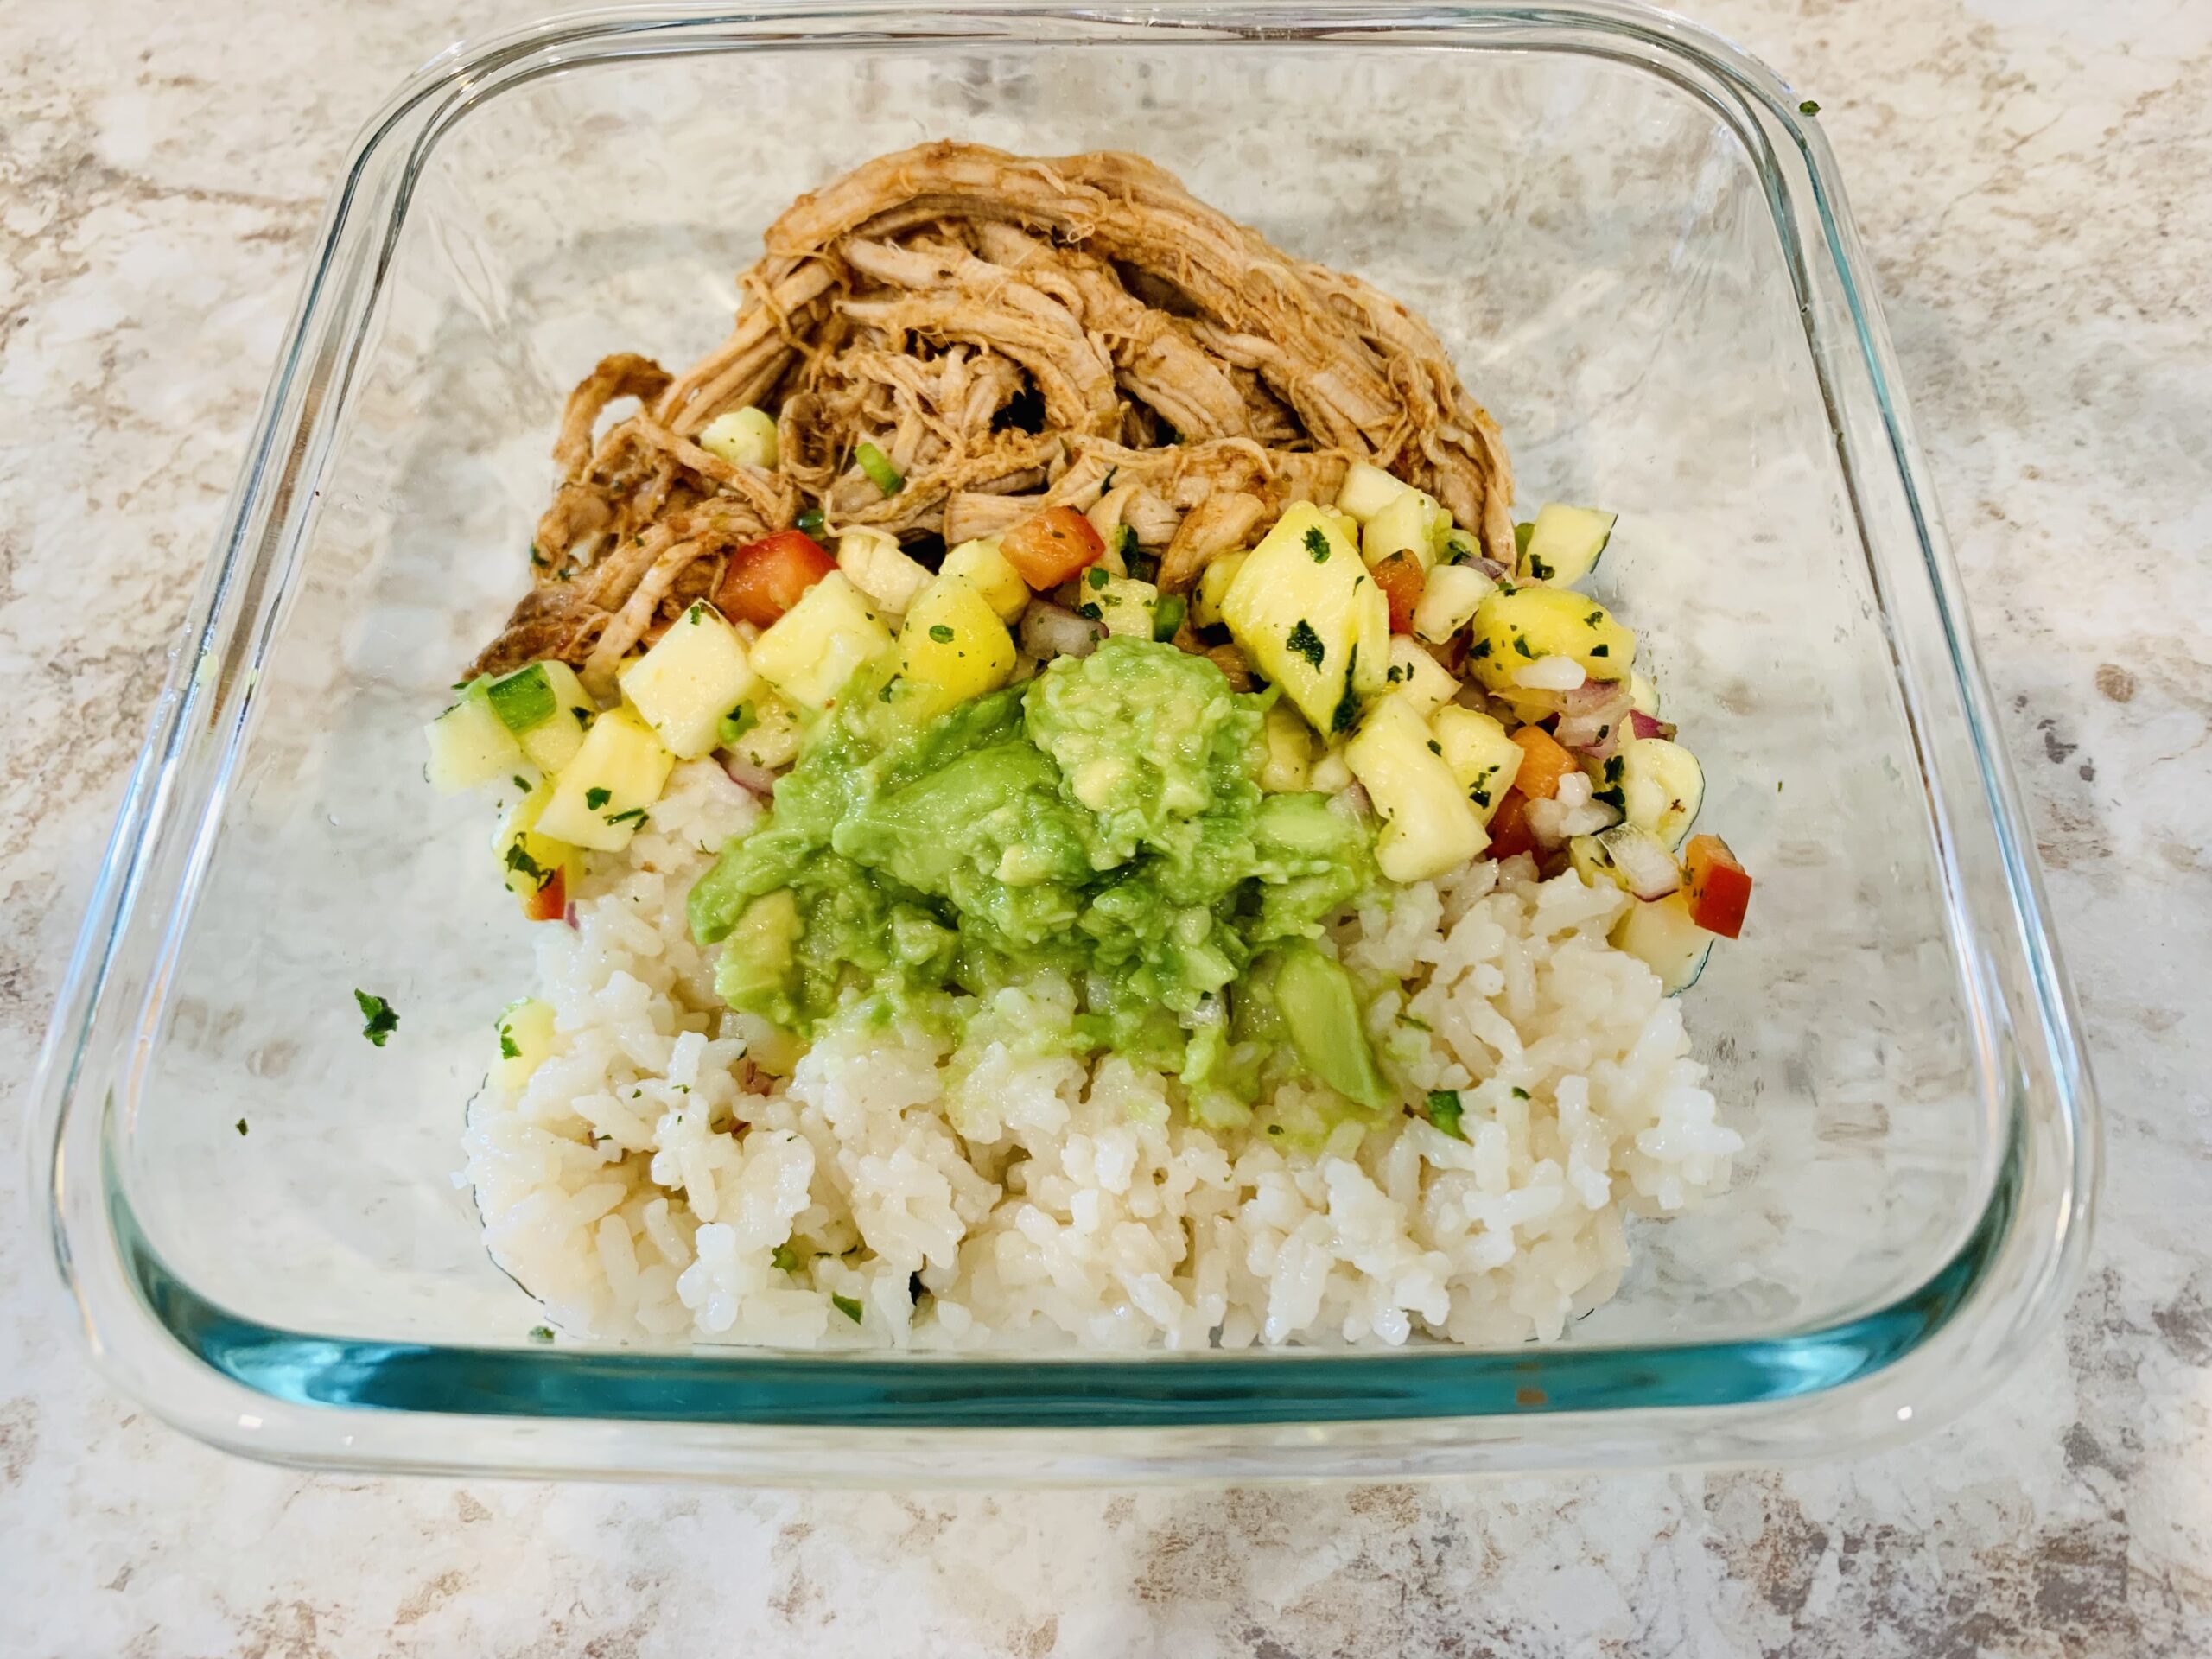 Honey-Chipotle Pork Bowls with Pineapple Salsa